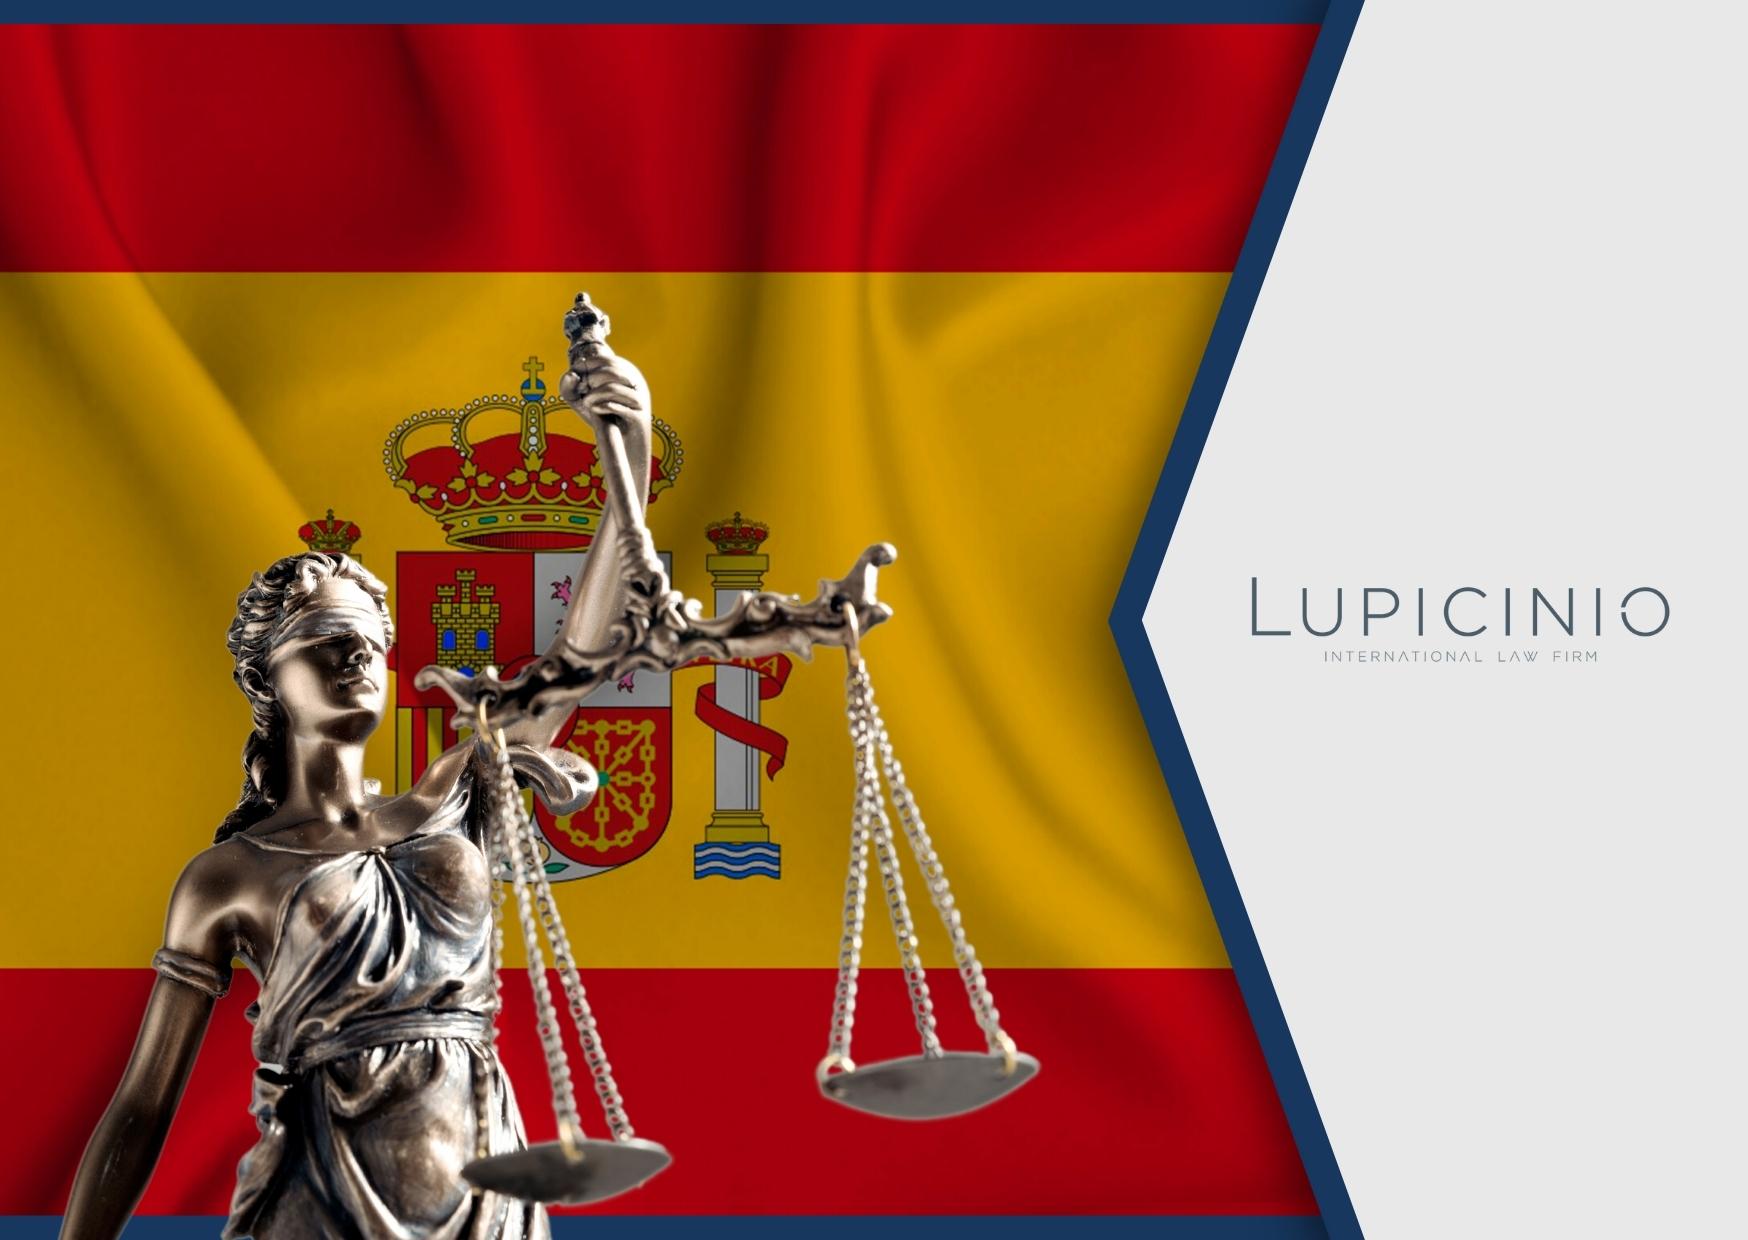 SPANISH NATIONALITY: DEFENDING THE ADMINISTRATIVE ROUTE TO IMPROVE AND SPEED UP JUSTICE